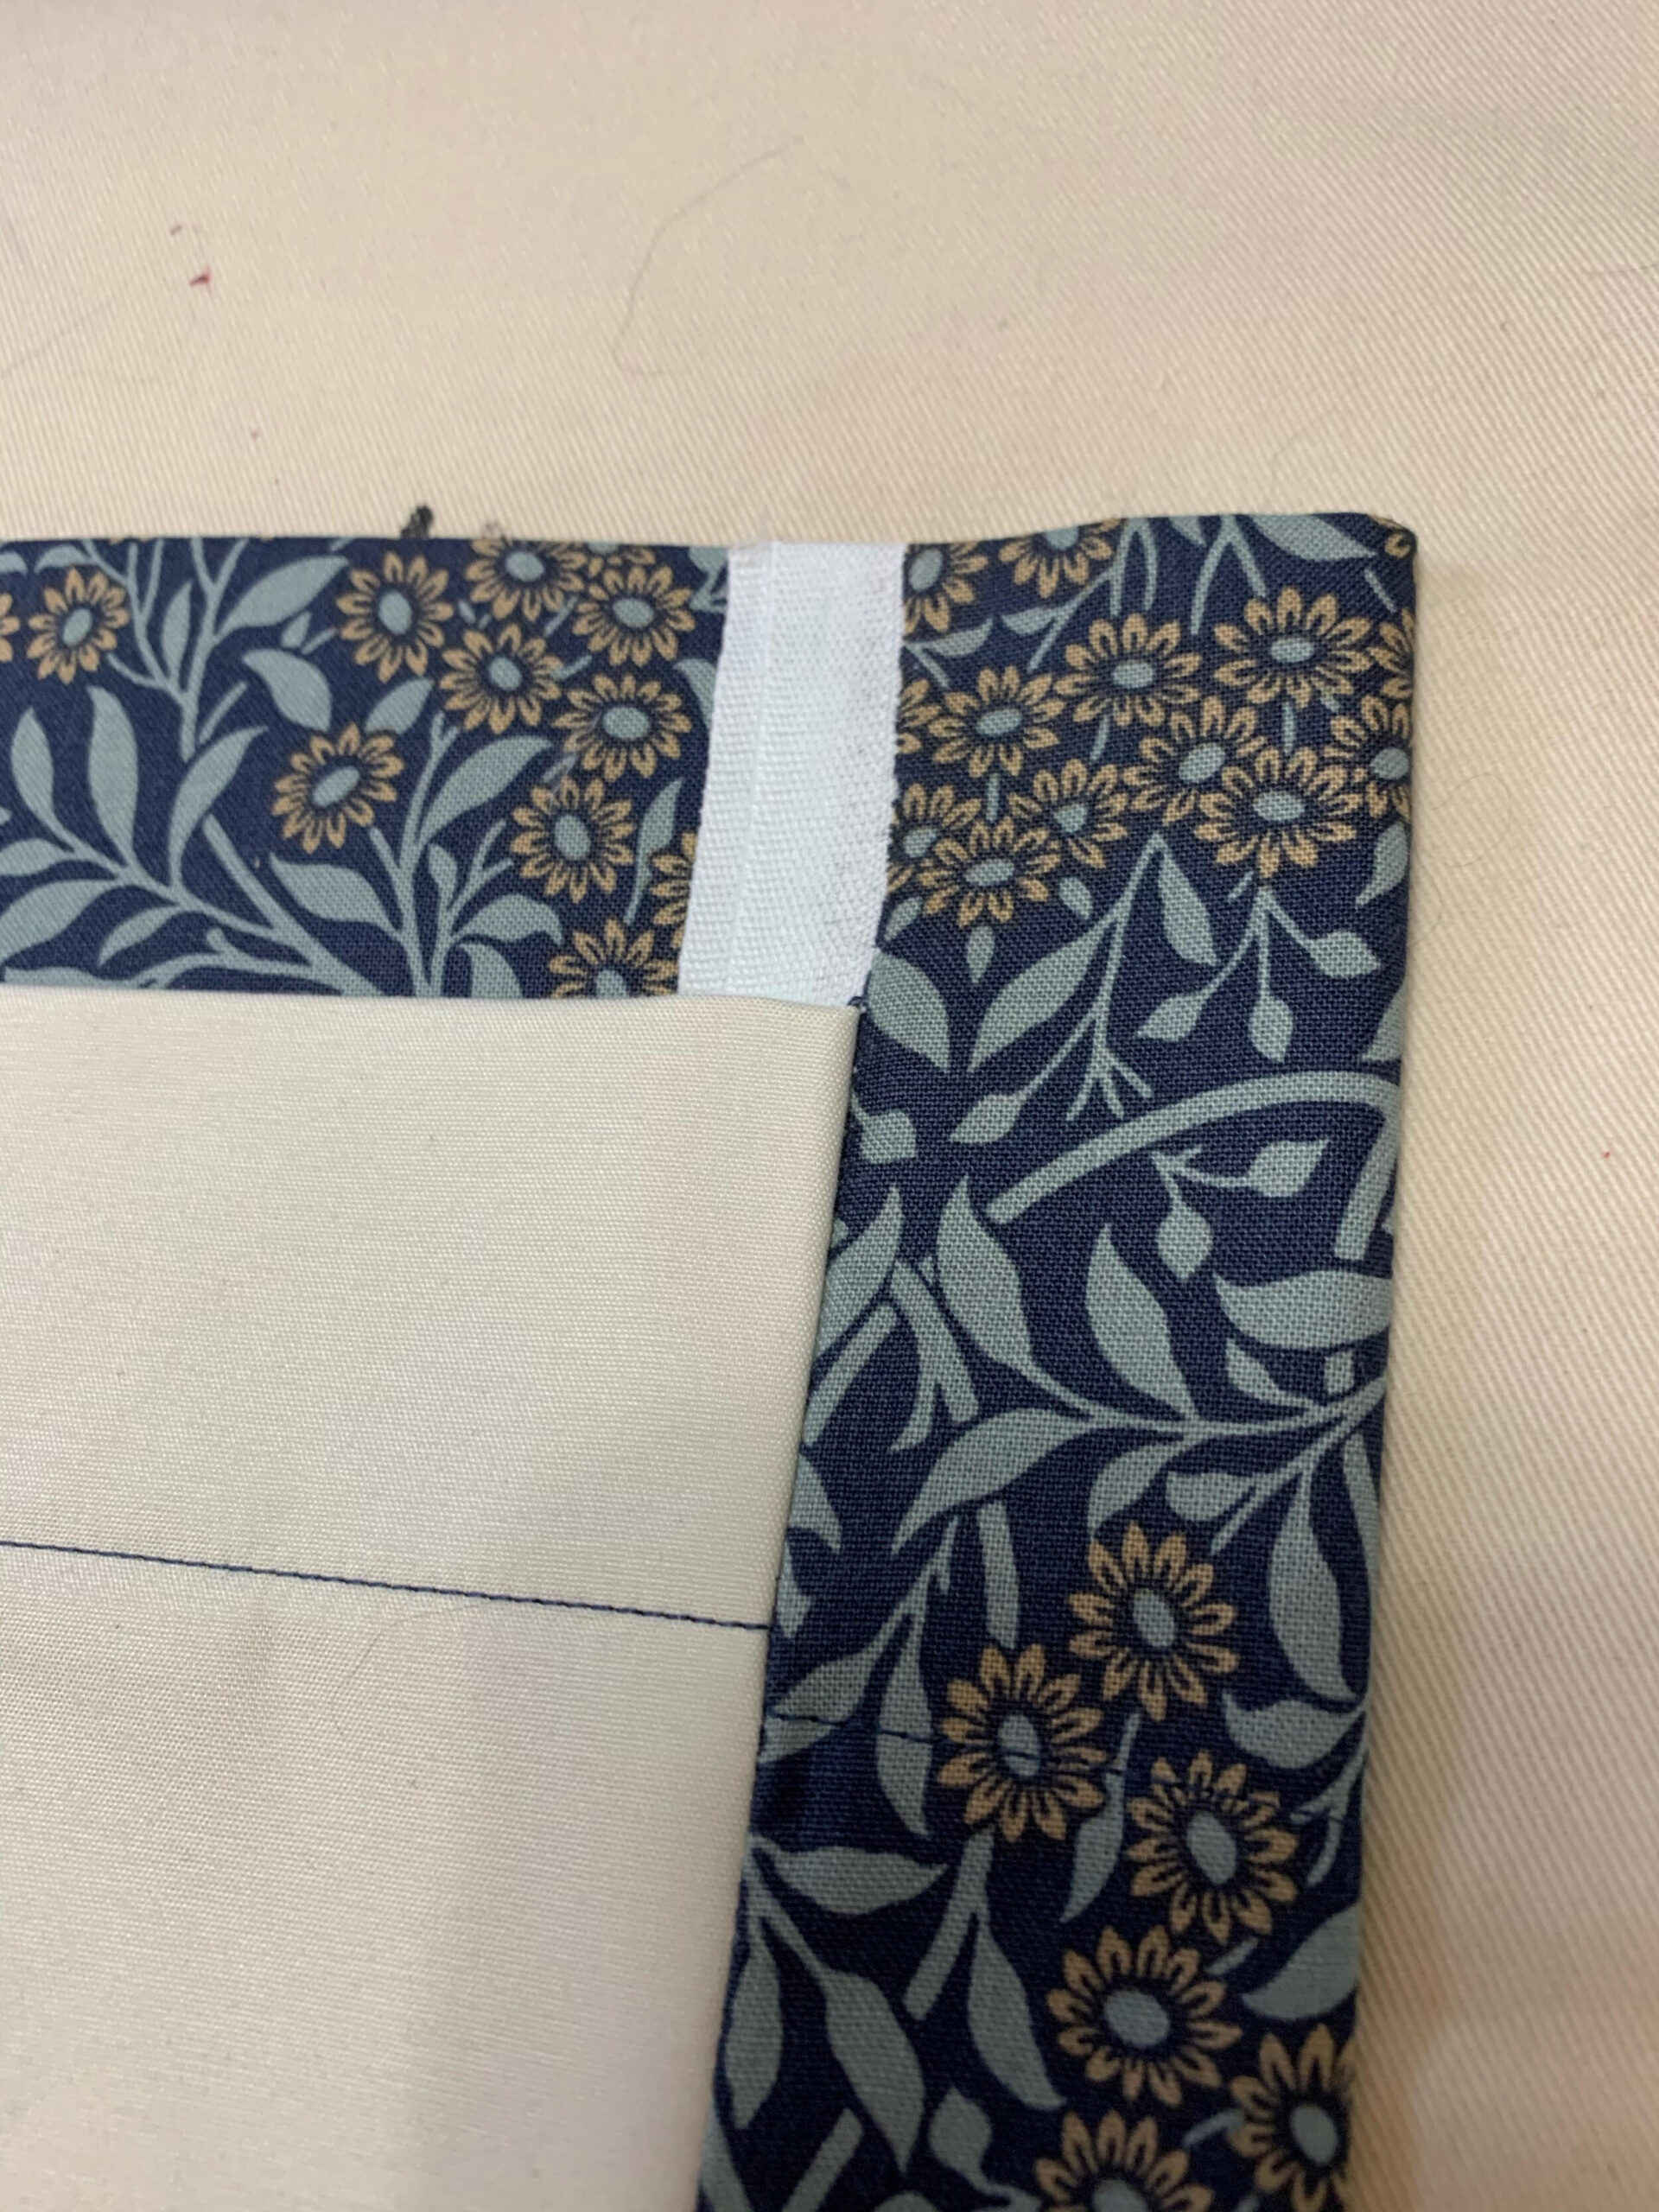 showing inside bottom edge of curtain fabric 